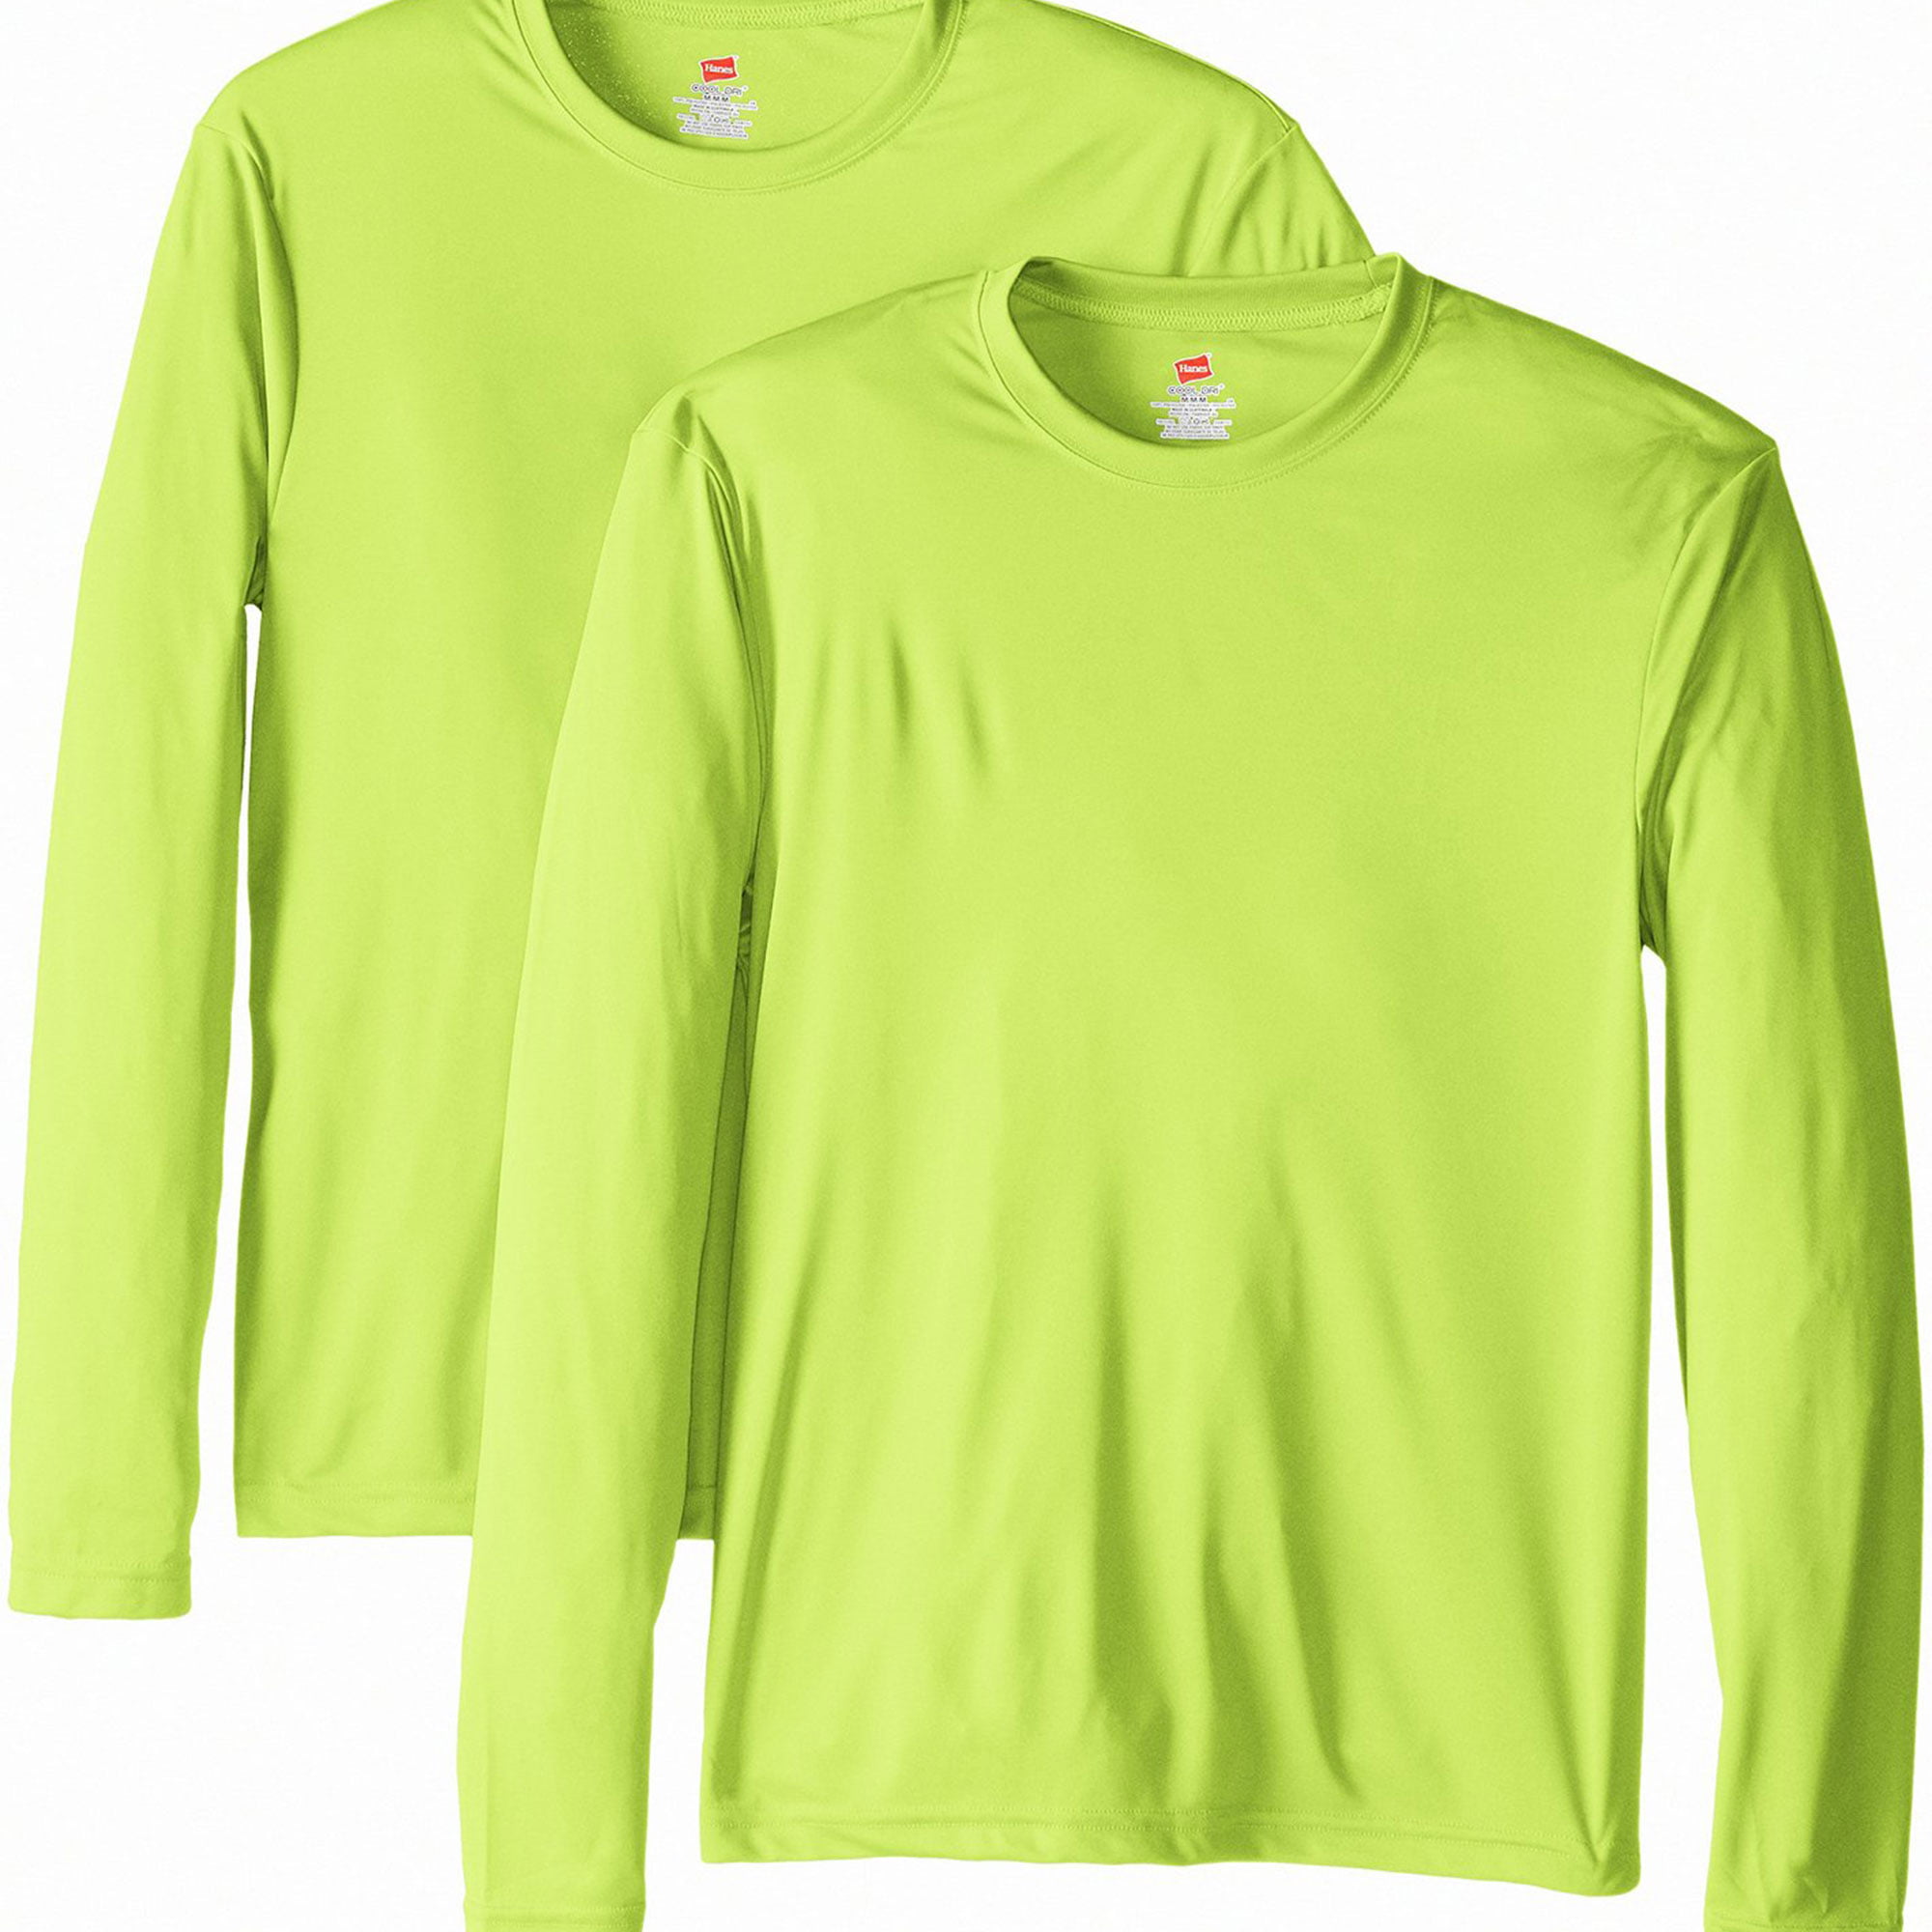 Hanes - Hanes Men Two Pack Long-Sleeve Cool Dri T-Shirts, Pack of 2 ...